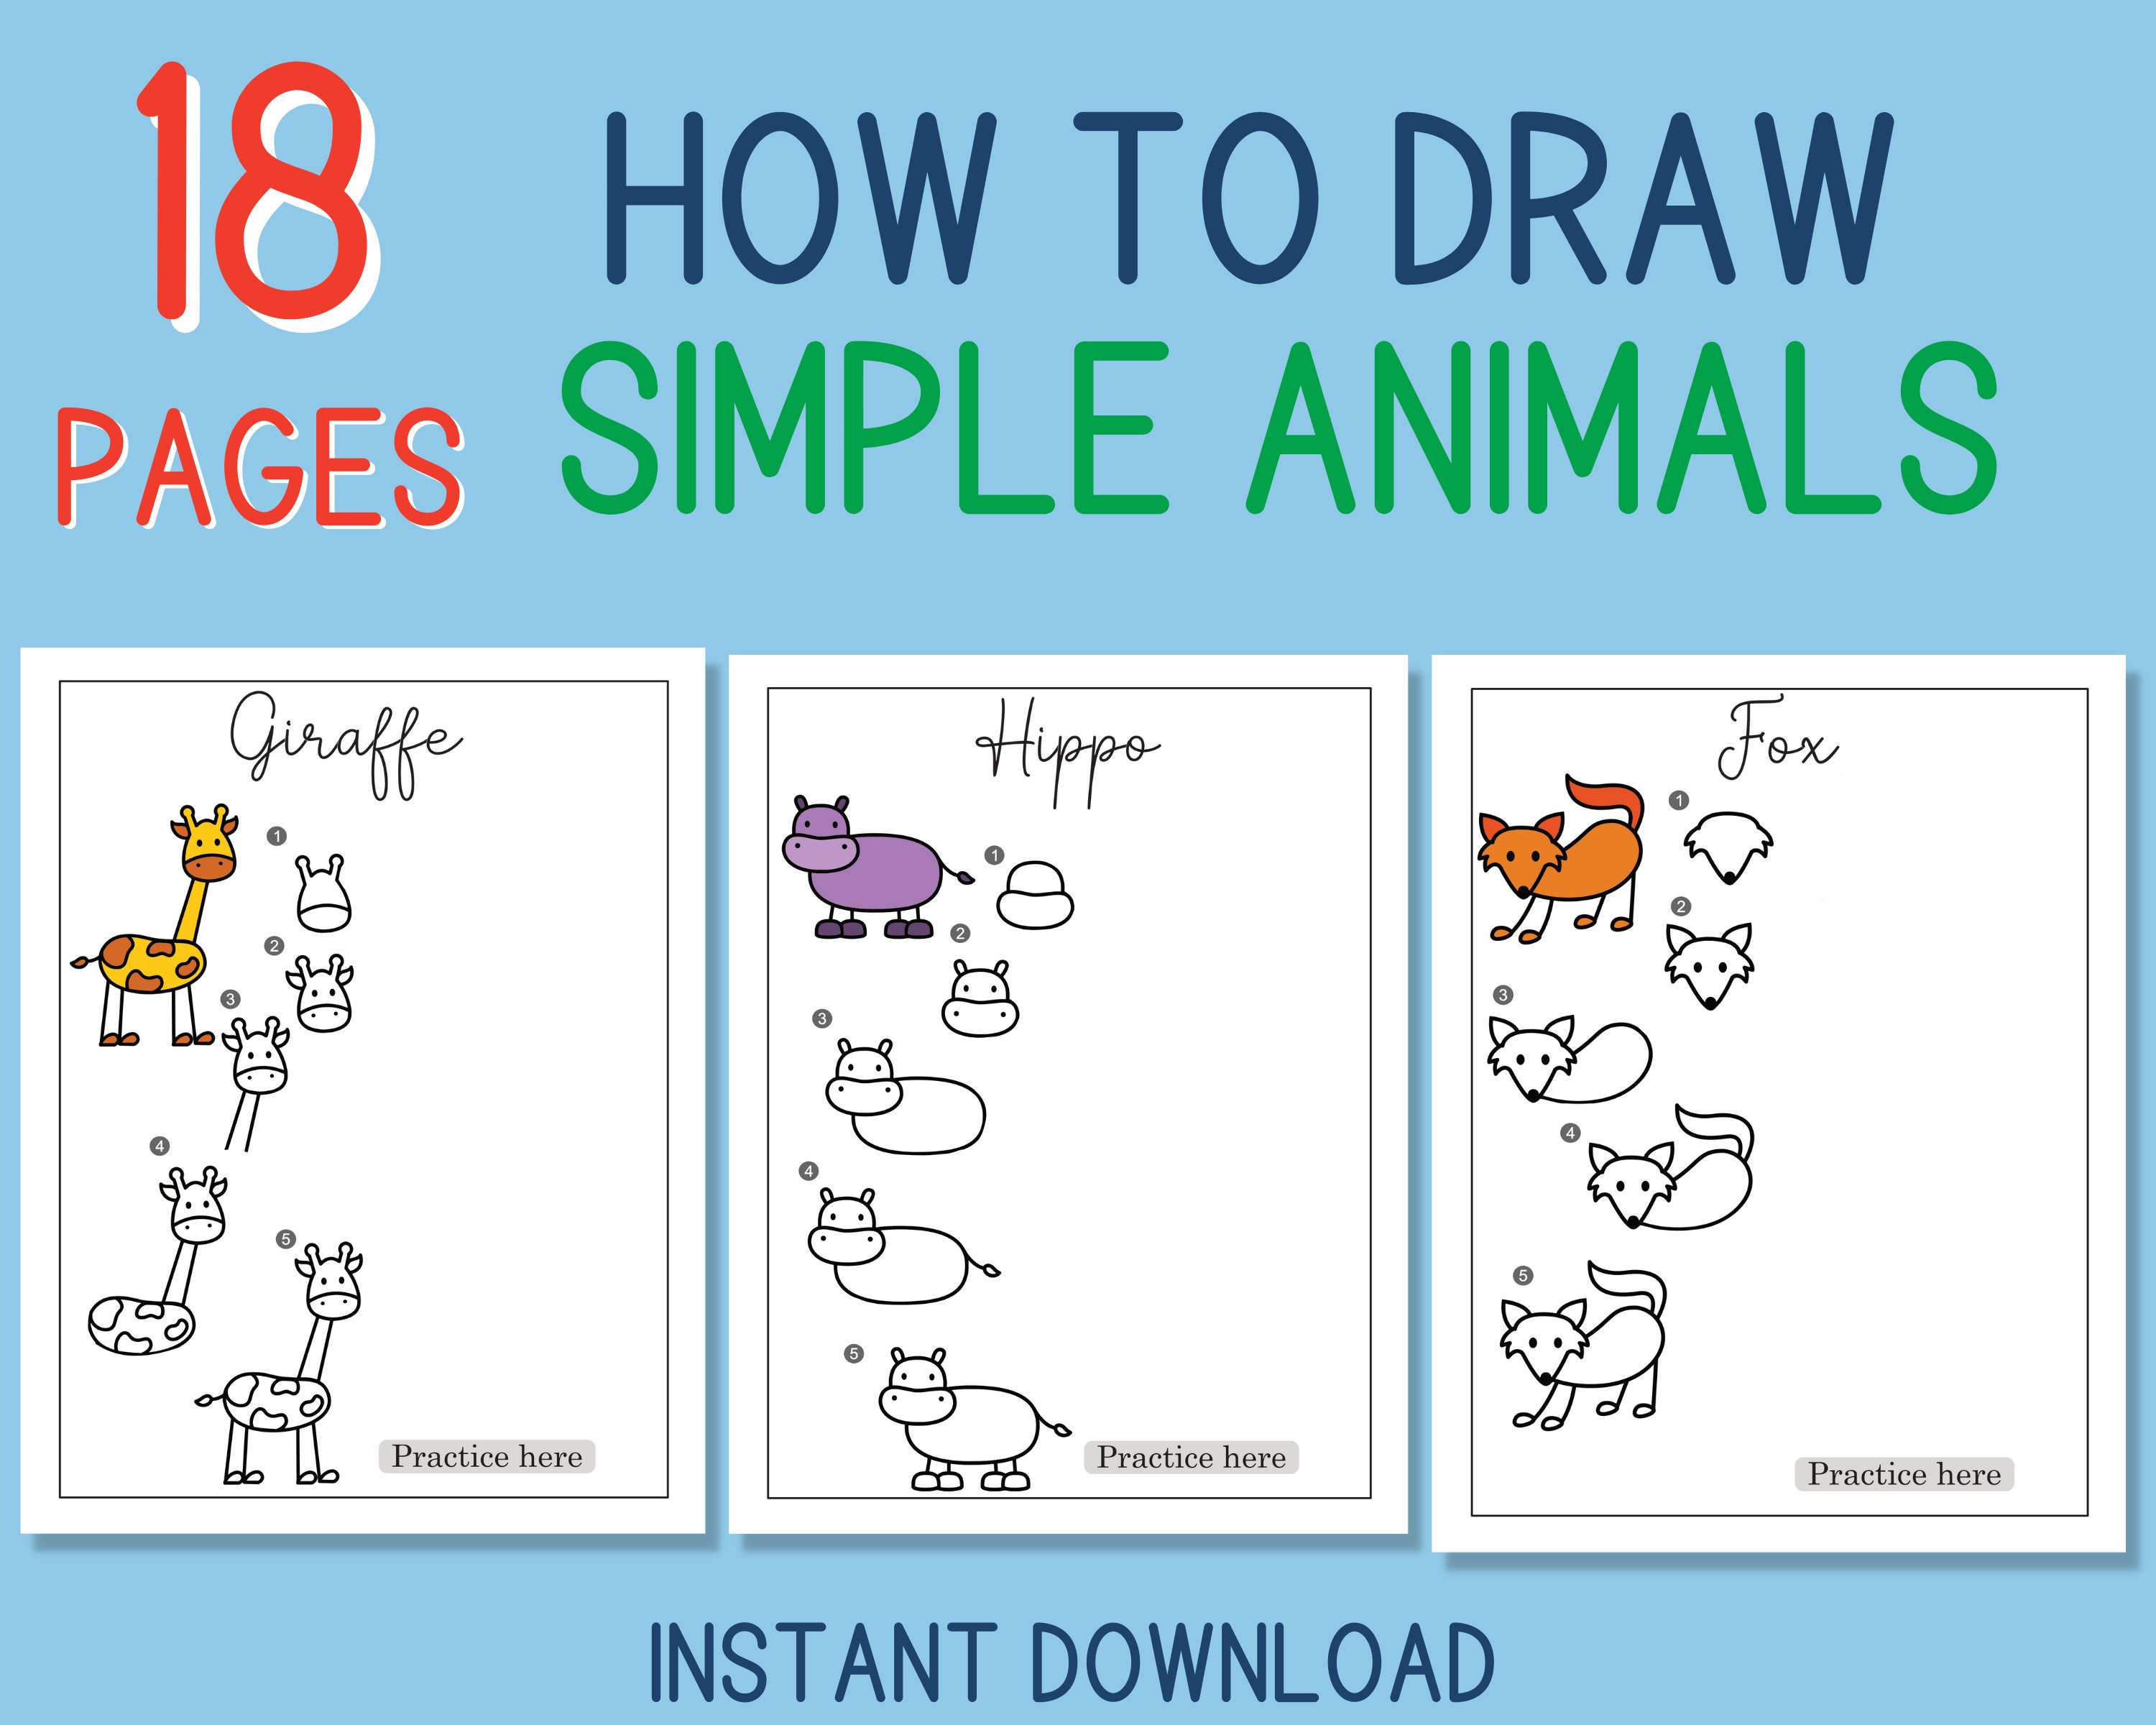 How To Draw 101 Cute Stuff For Kids: How to Draw Book for Kids Ages 4-8,  8-12  Learn to Draw Easy Characters Step-By-Step For All Fans Beginners  Boys and Adults by